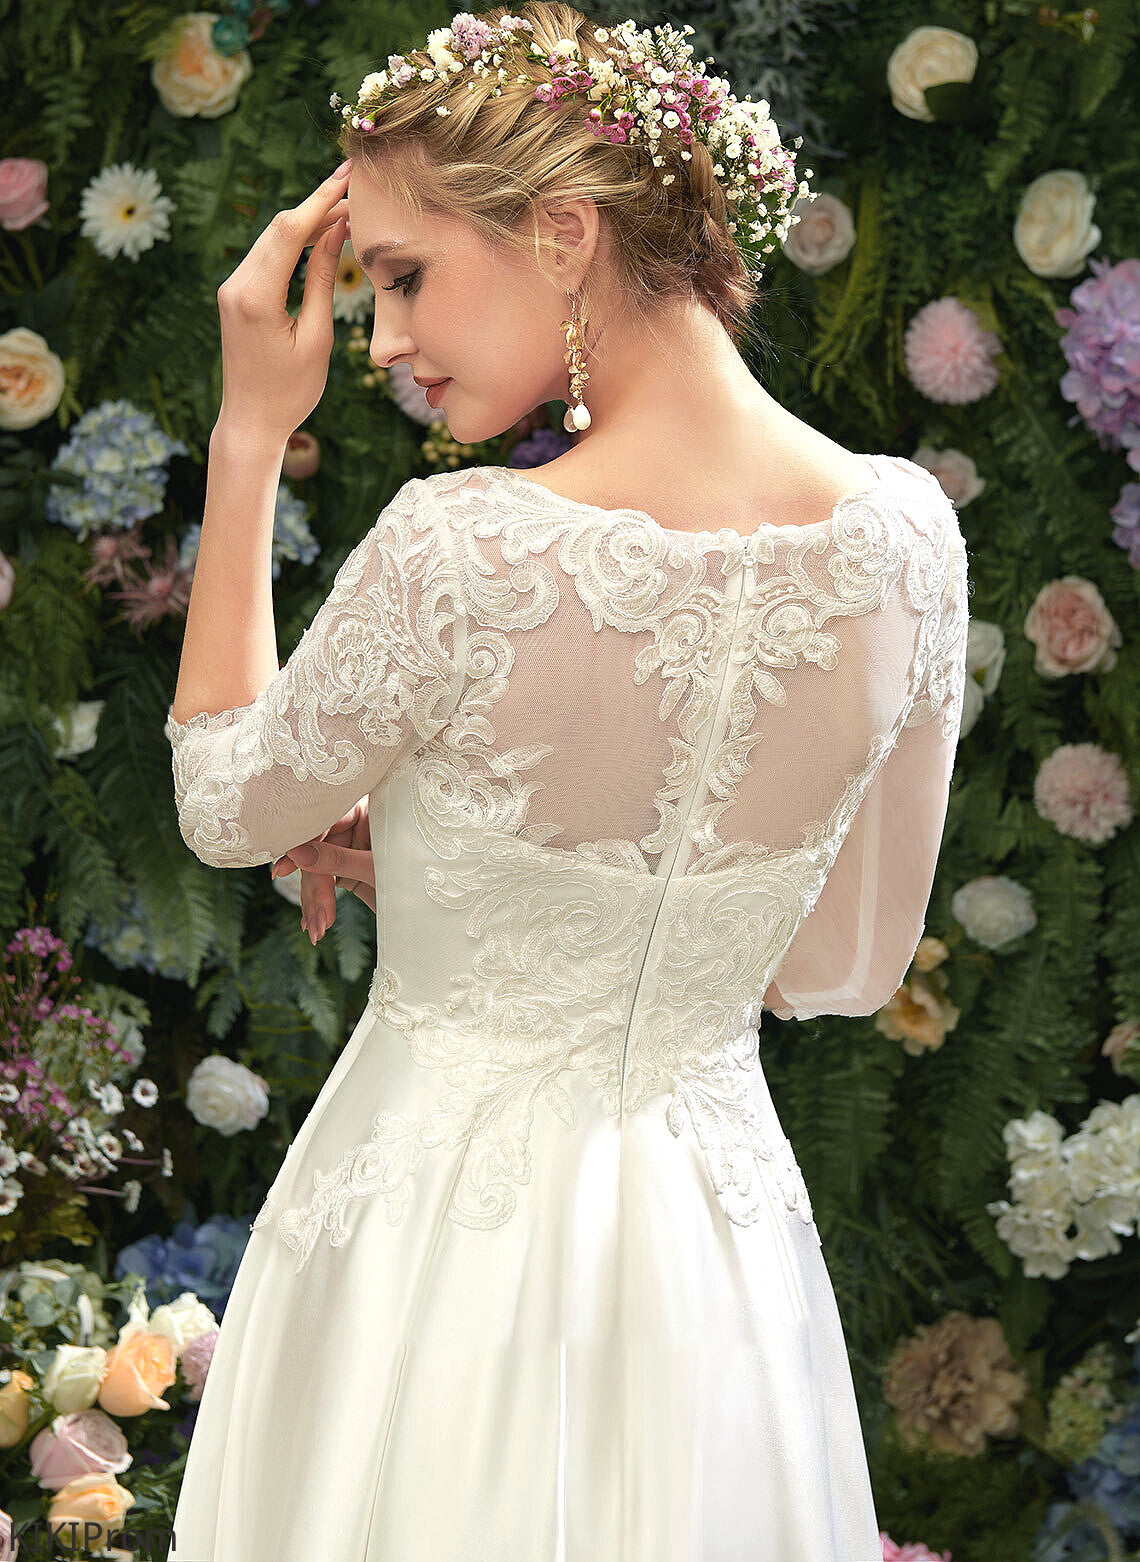 Wedding Dresses Tea-Length Lace Dress Cassidy Wedding A-Line Illusion With